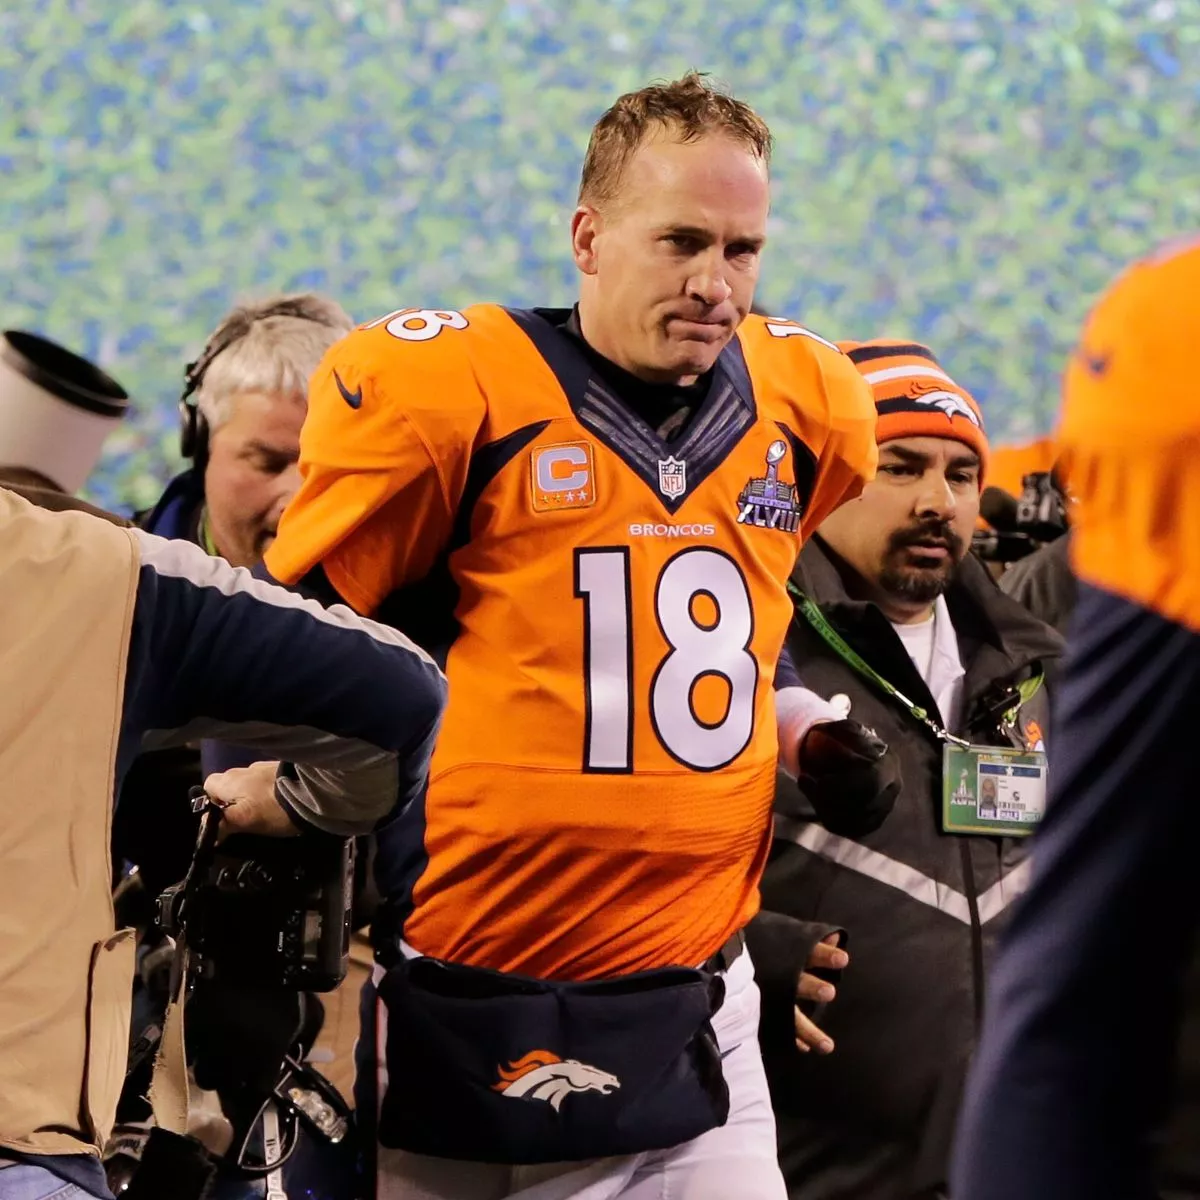 Which team did Peyton Manning defeat in the AFC Championship game to advance to Super Bowl XLI?